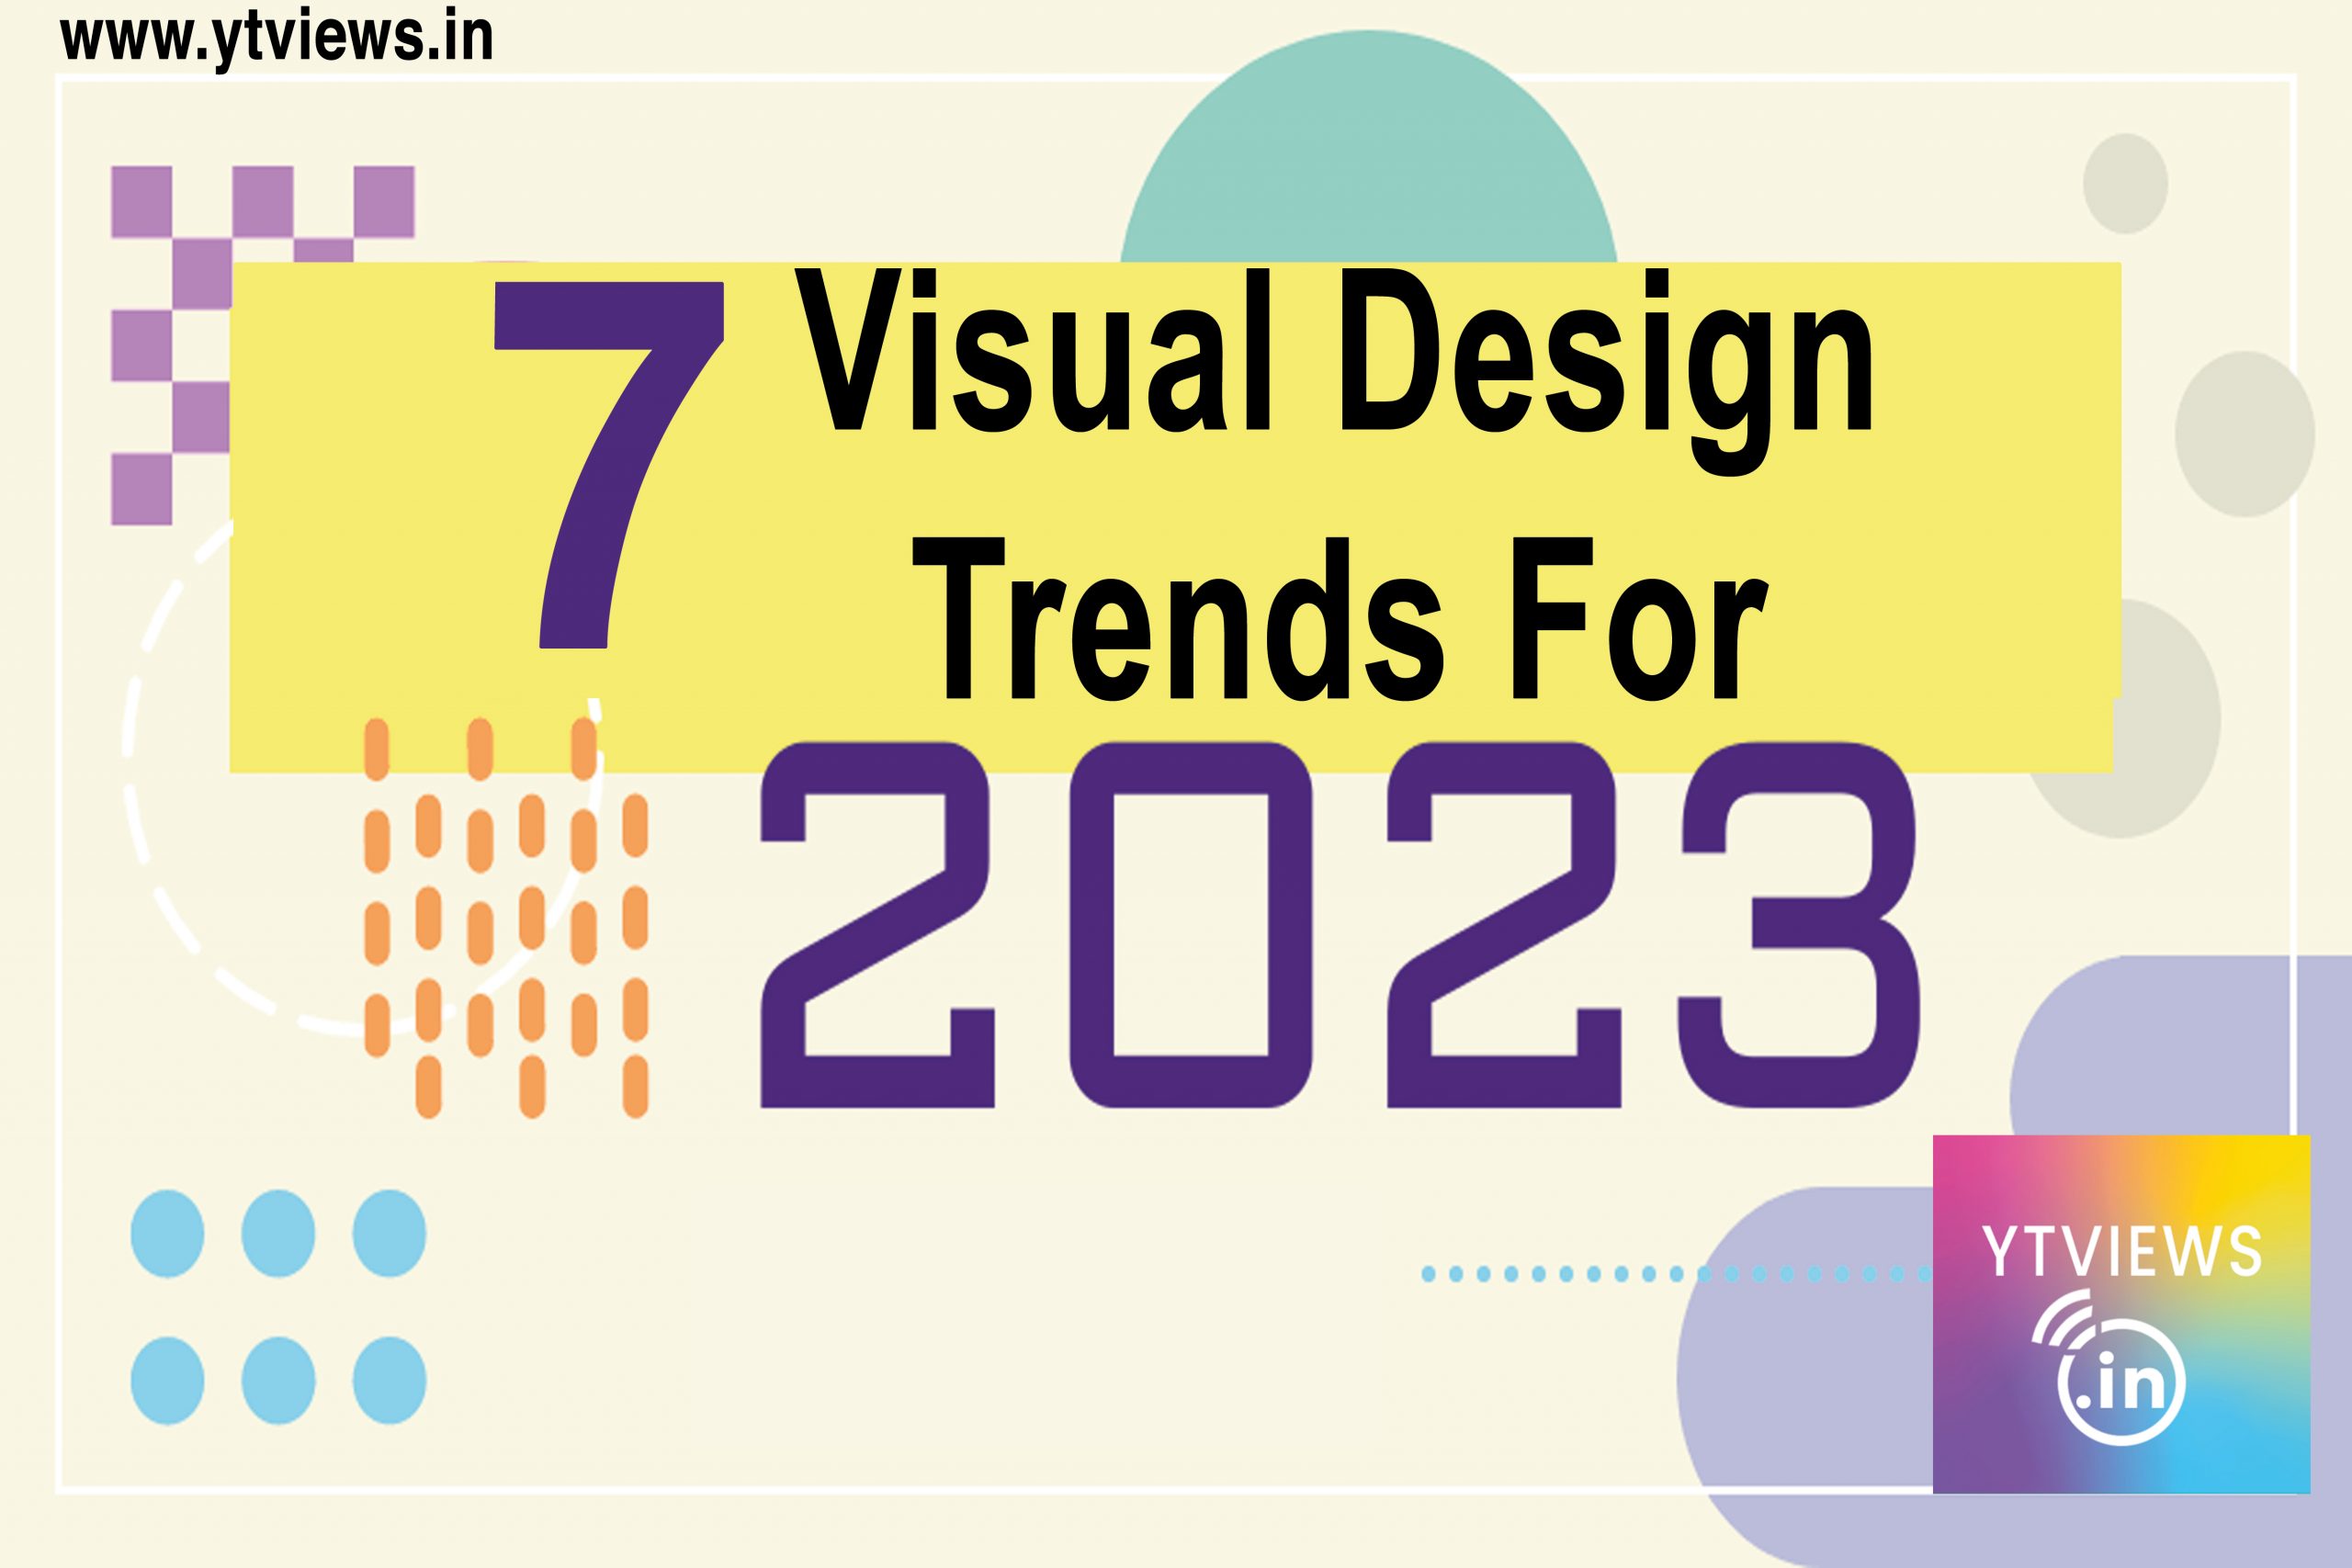 7 Visual Design Trends for 2023